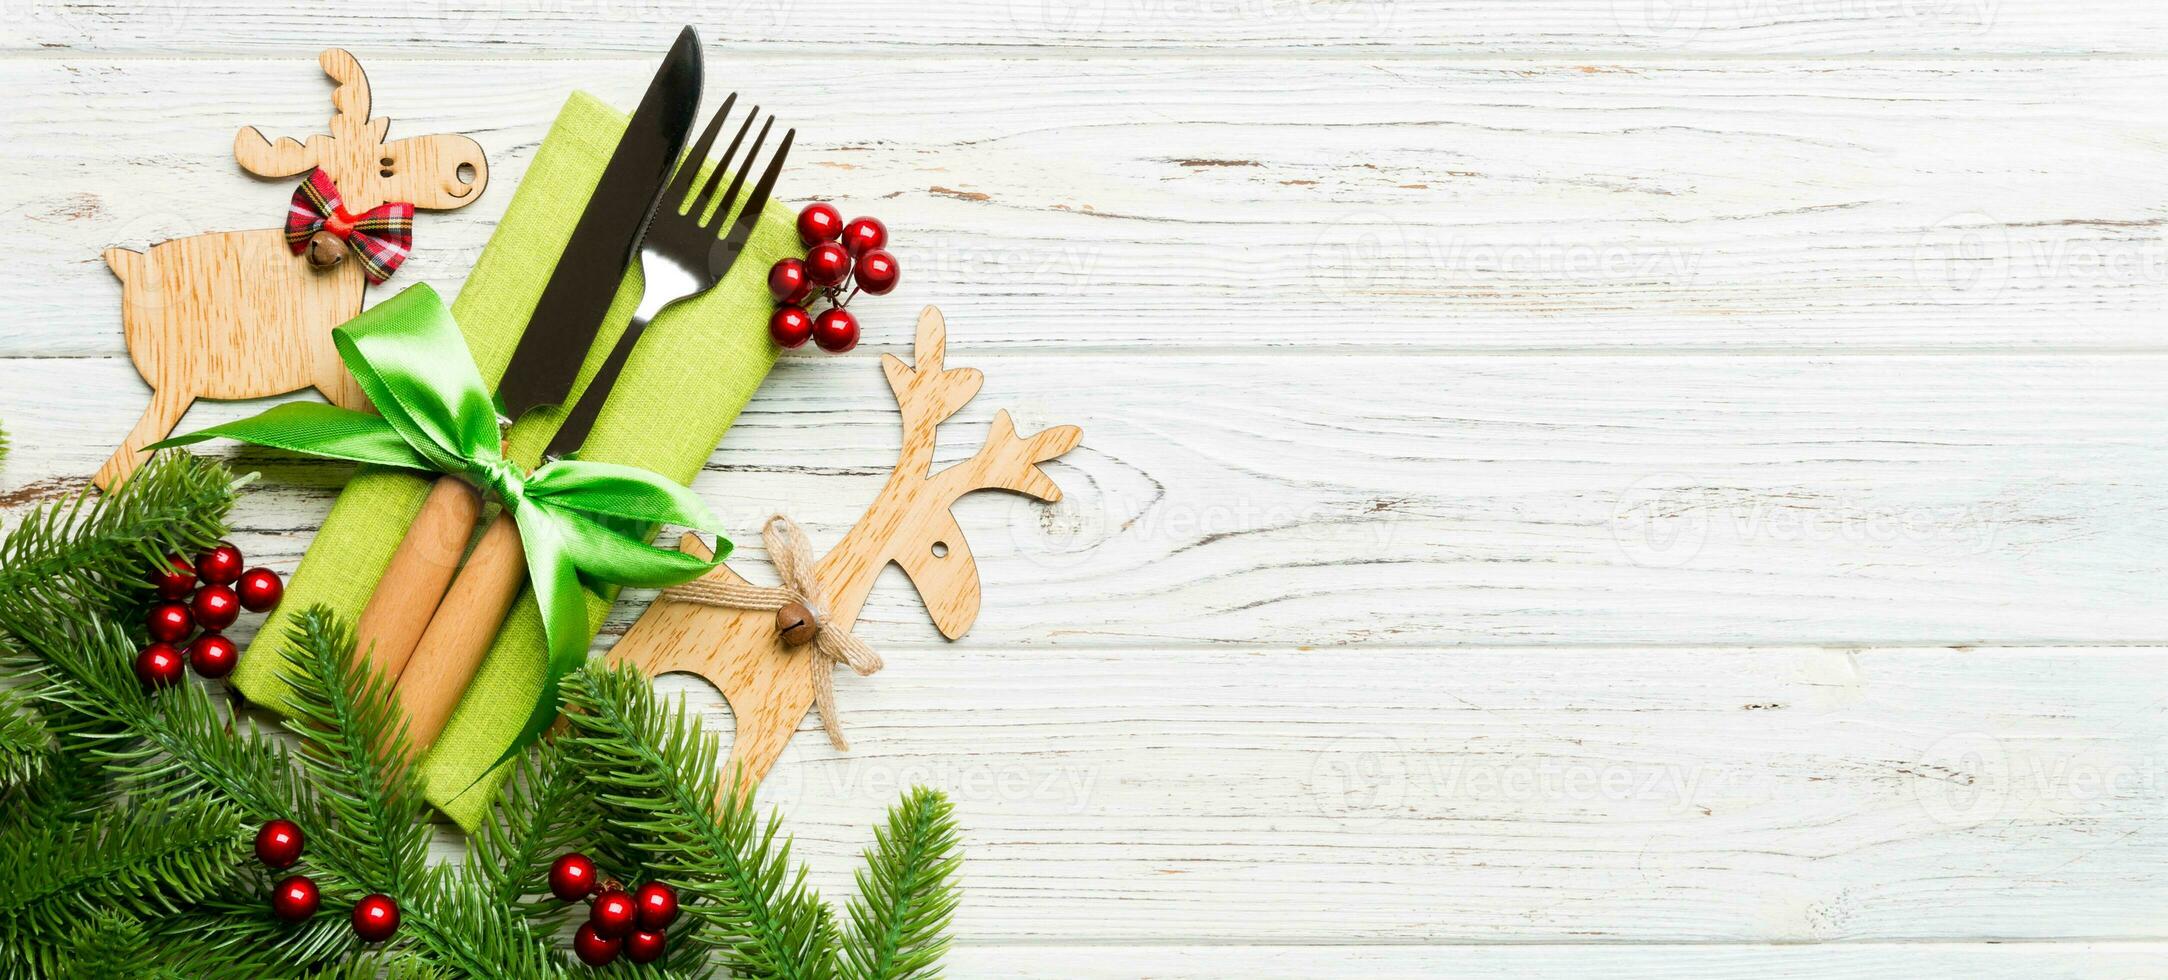 Banner top view of holiday objects on wooden background. Utensils tied up with ribbon on napkin. Christmas decorations and reindeer with copy space. New year dinner concept photo